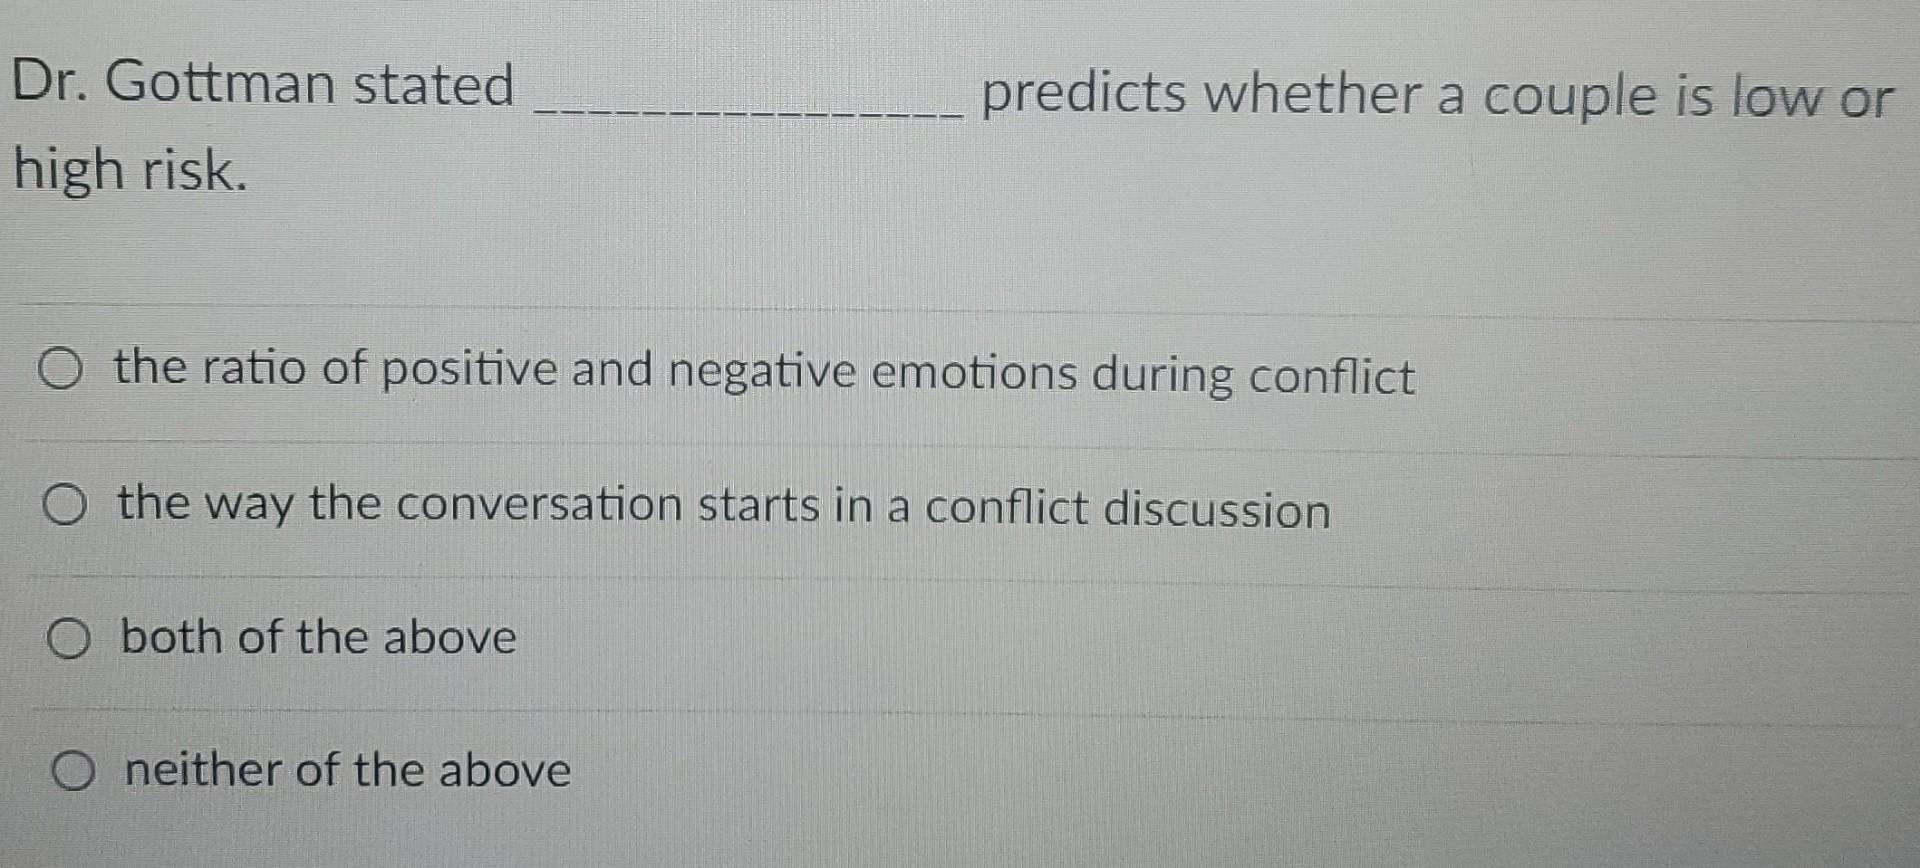 Dr. Gottman stated high risk. O the ratio of positive and negative emotions during conflict O the way the conversation starts